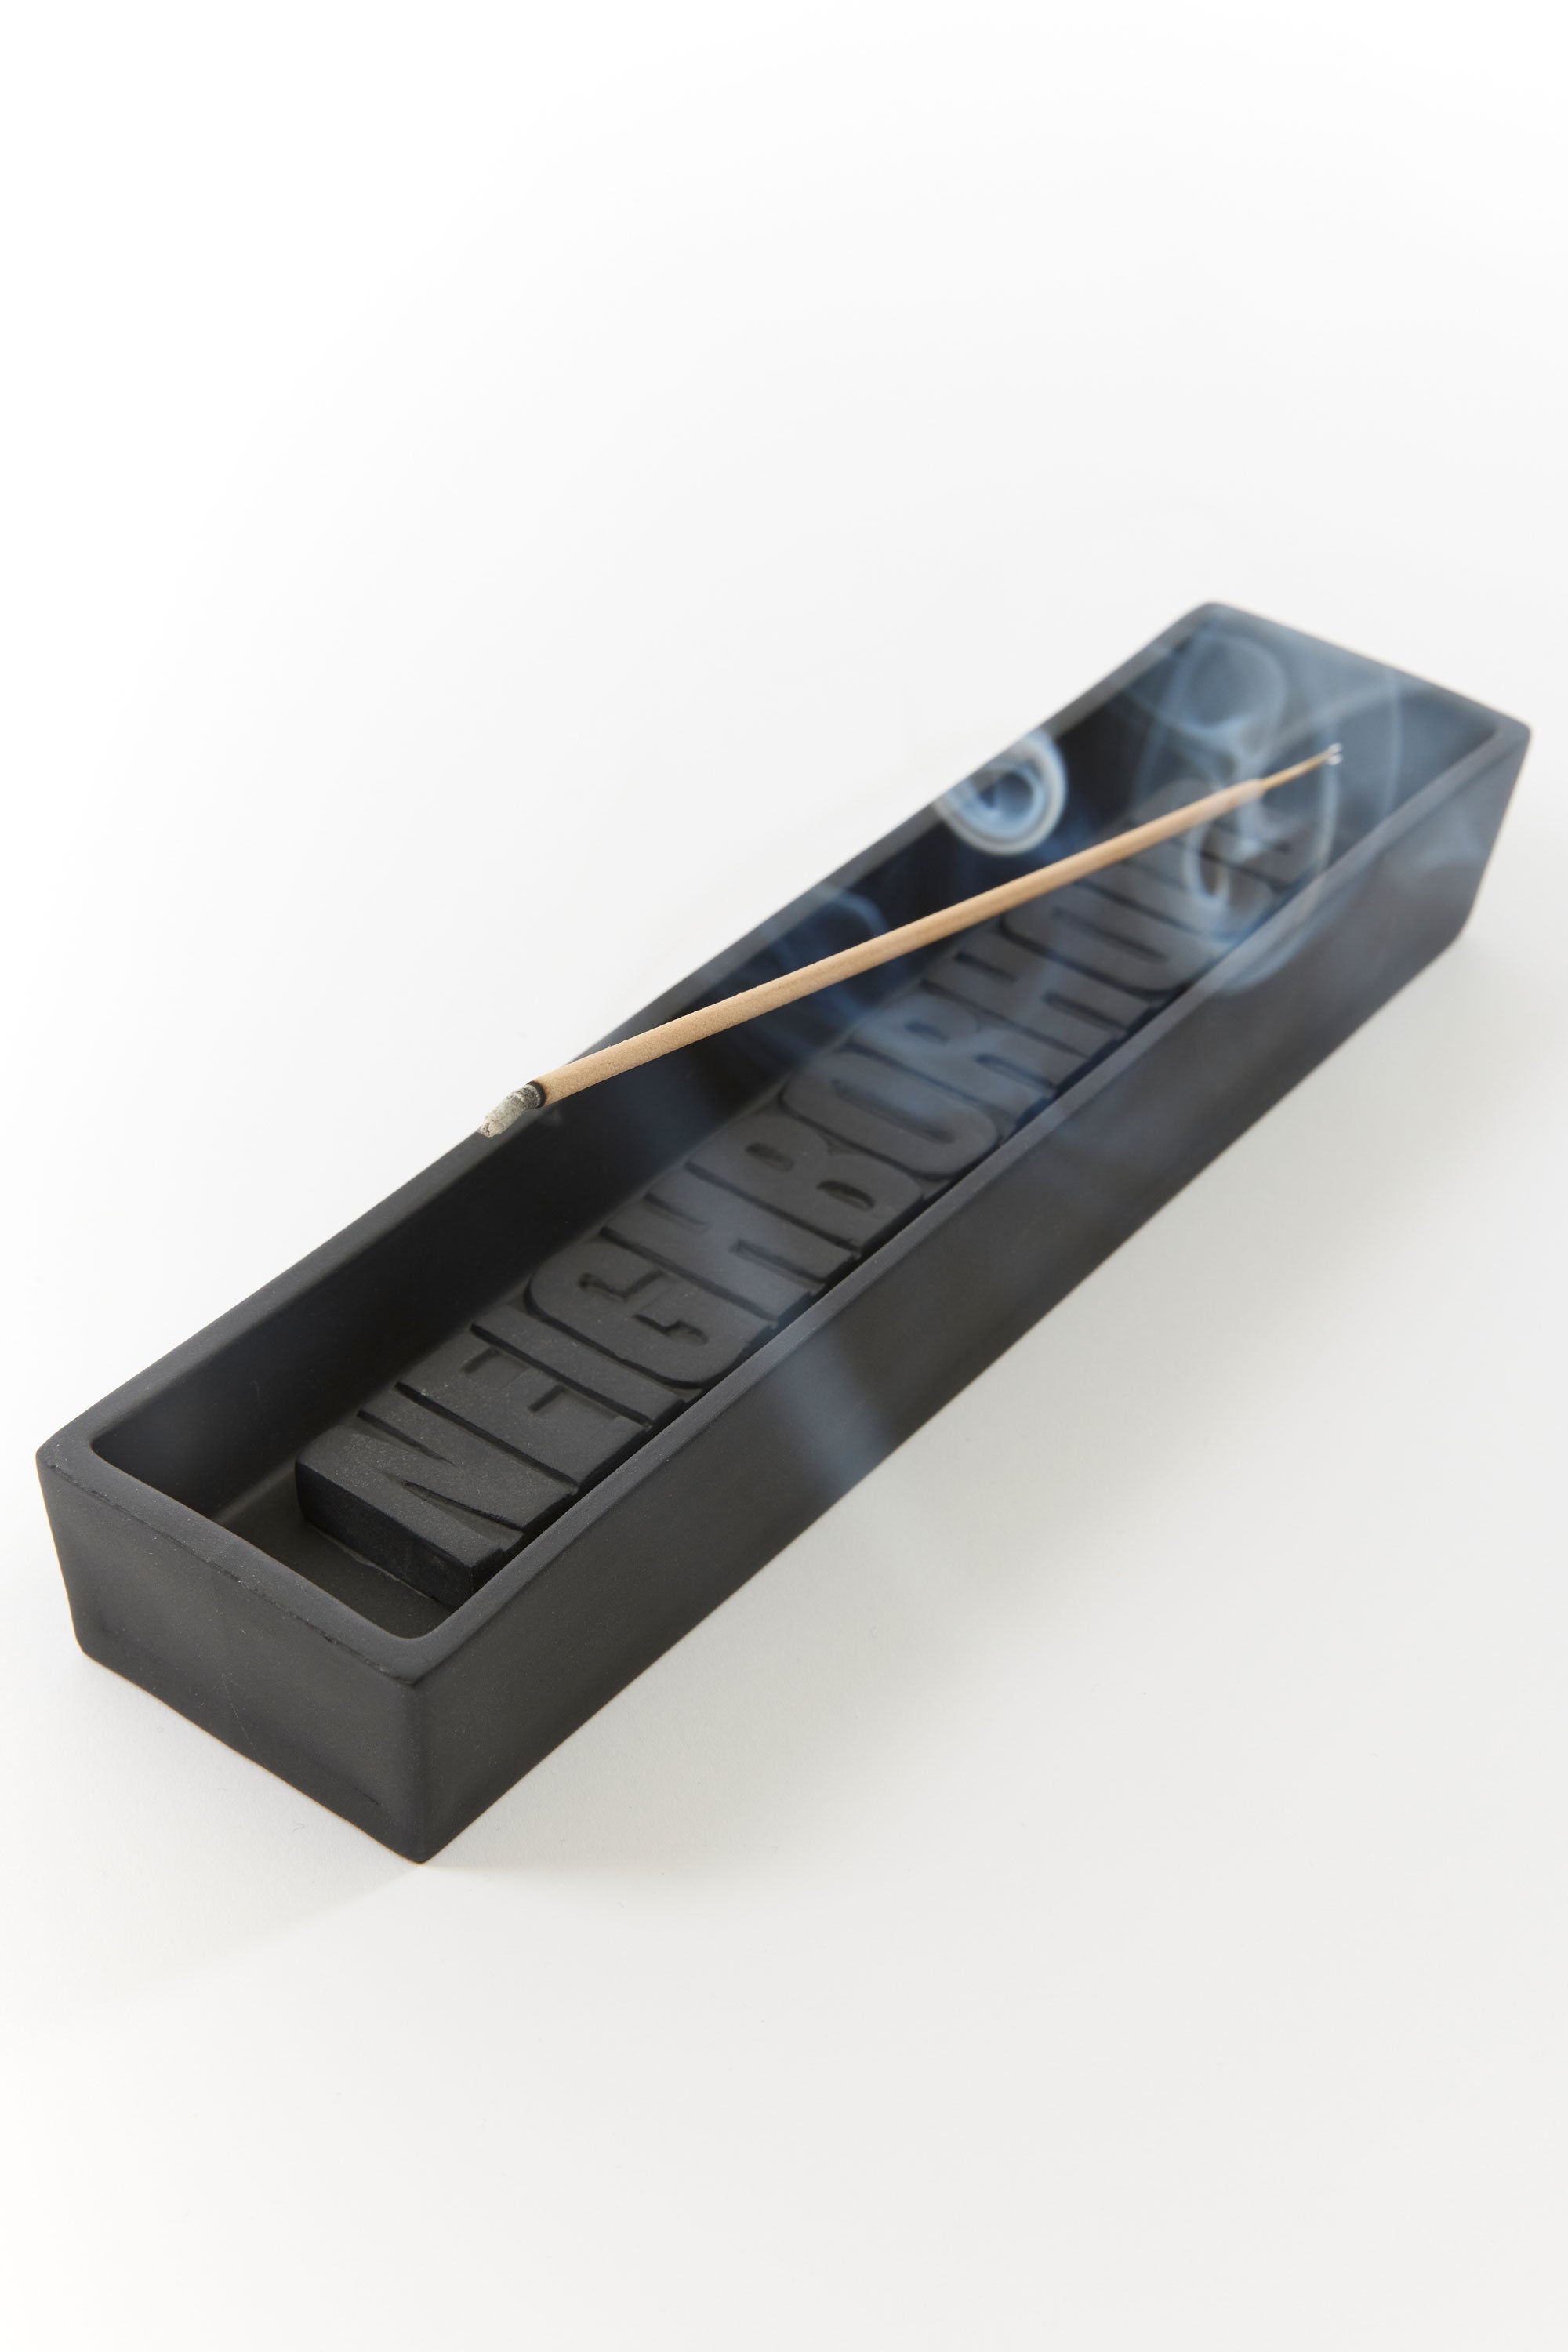 The NEIGHBORHOOD - NEIGHBORHOOD CERAMIC INCENSE TRAY BLACK available online with global shipping, and in PAM Stores Melbourne and Sydney.